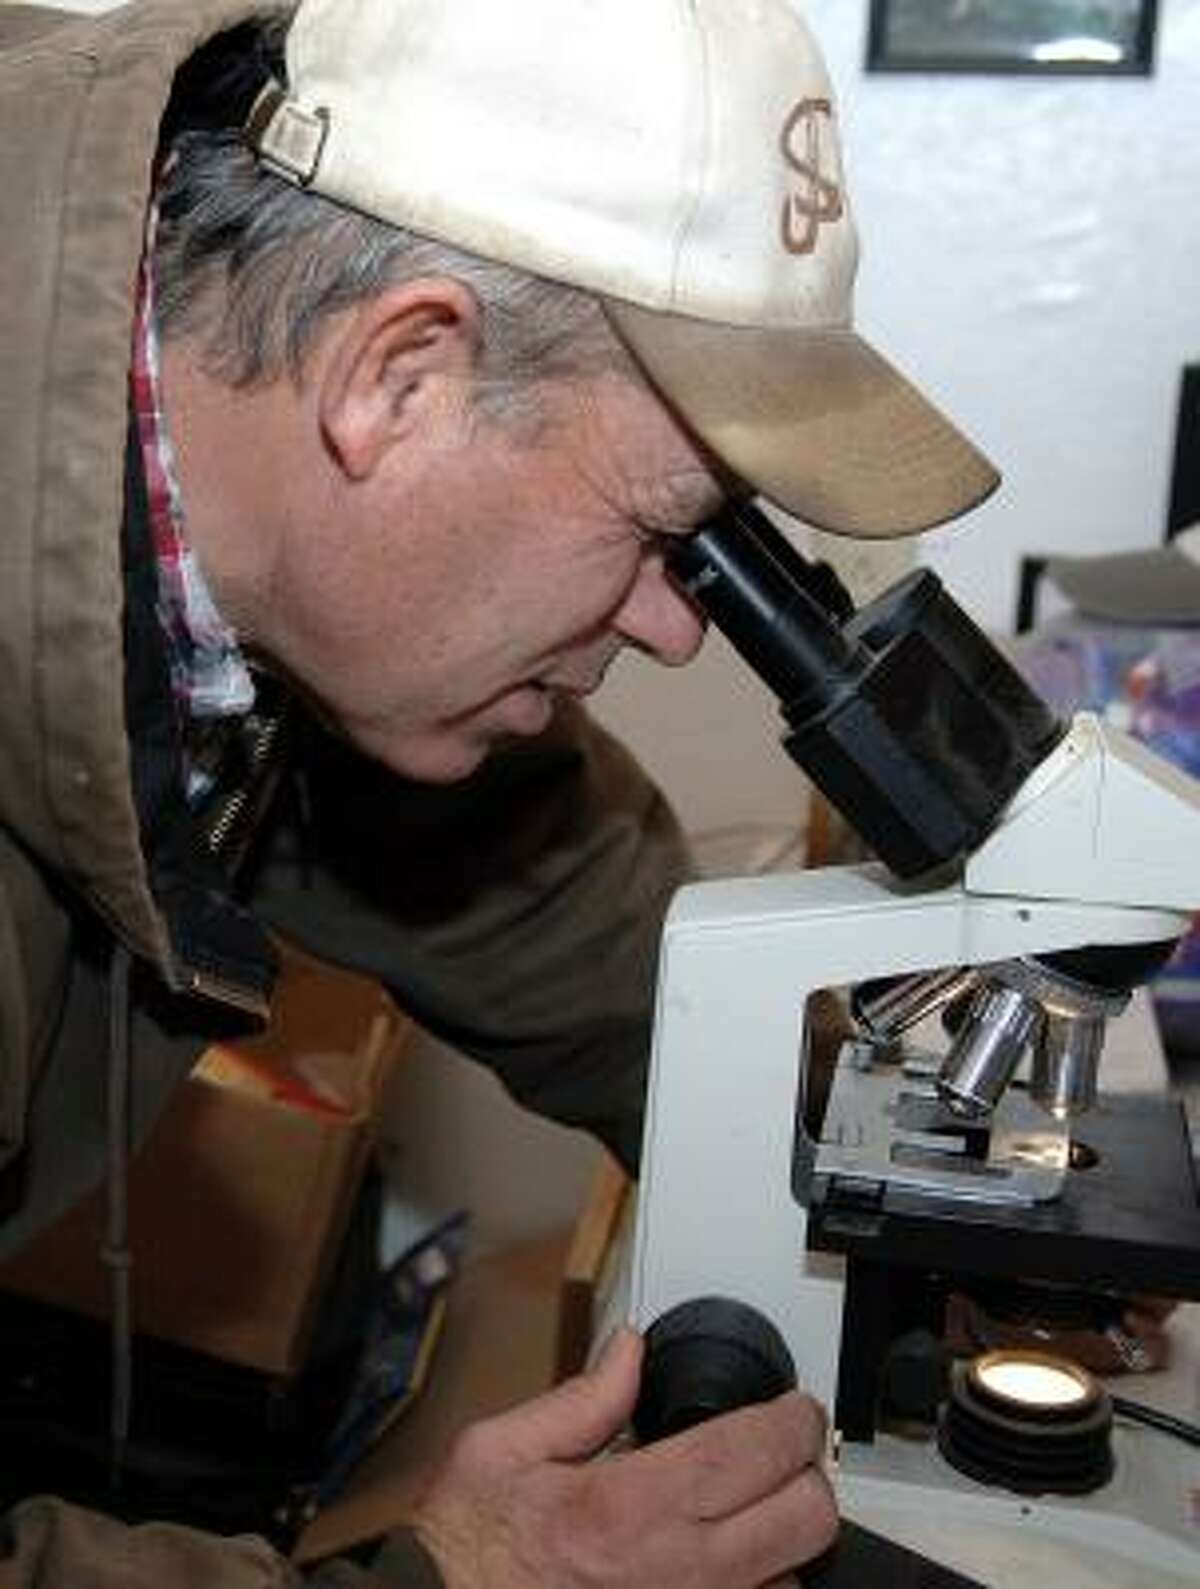 Ross Hirschfeld examines a semen sample from one of his prized boars in Benedict, Neb. News about subsidies that farmers like Hirschfeld have been getting from the federal government has raised the ire of his neighbors, but he says there are years that the subsidies have allowed him to break even.